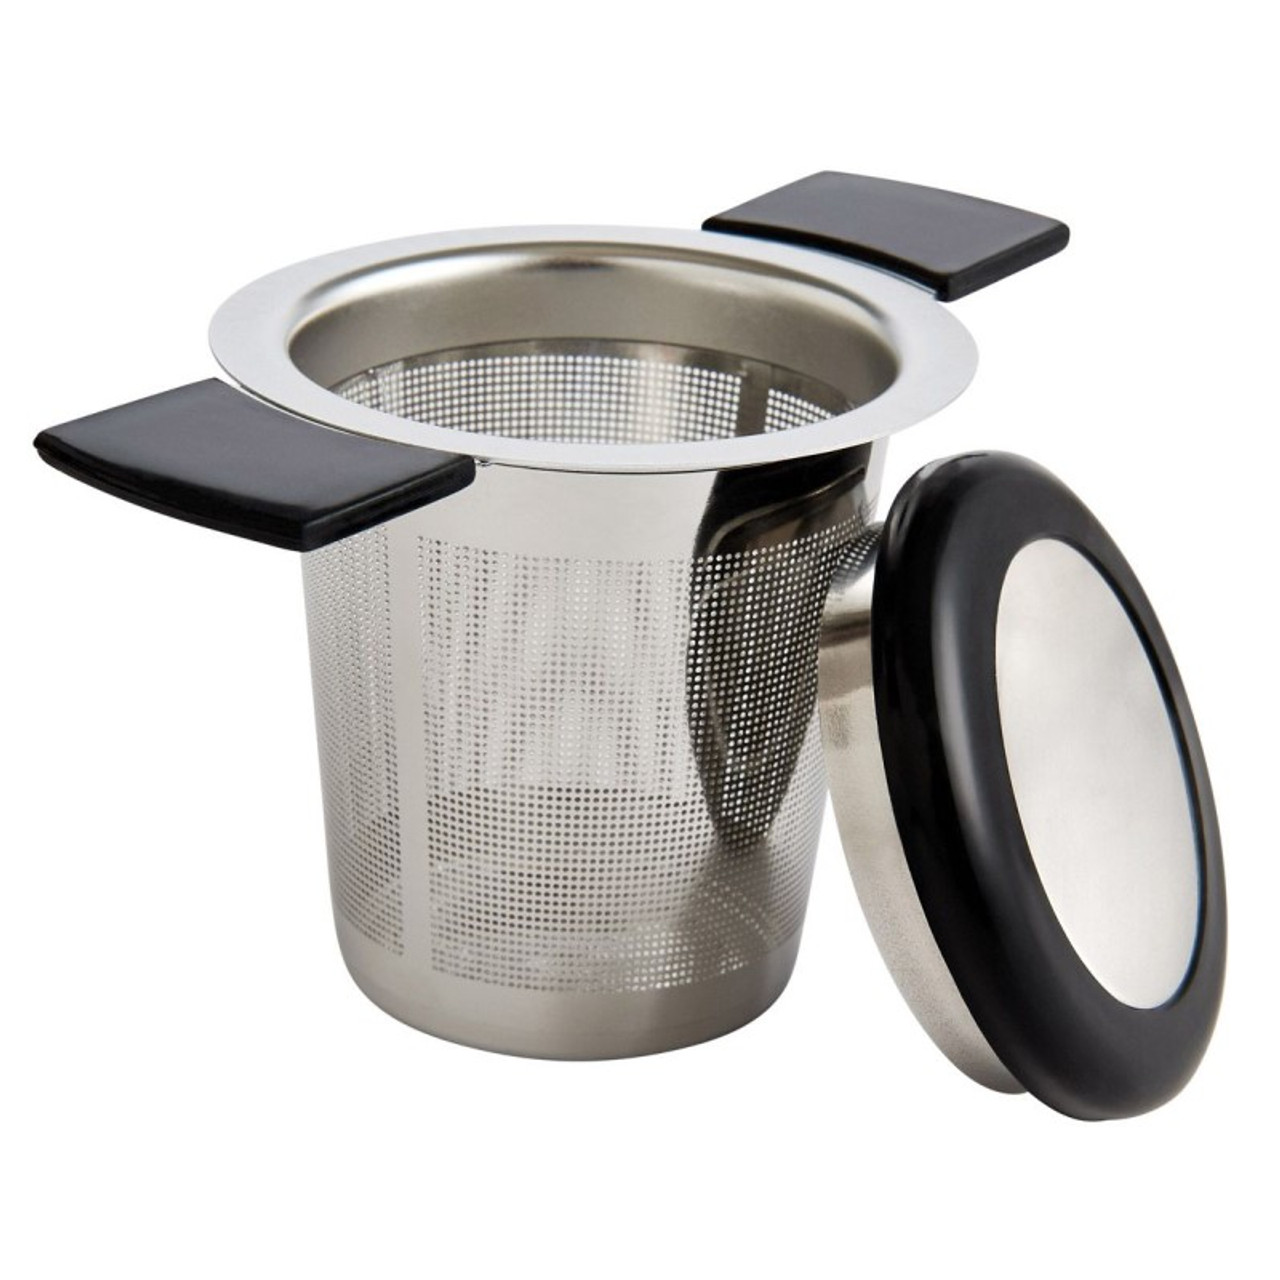 Double Handled Tea Strainer with Lid